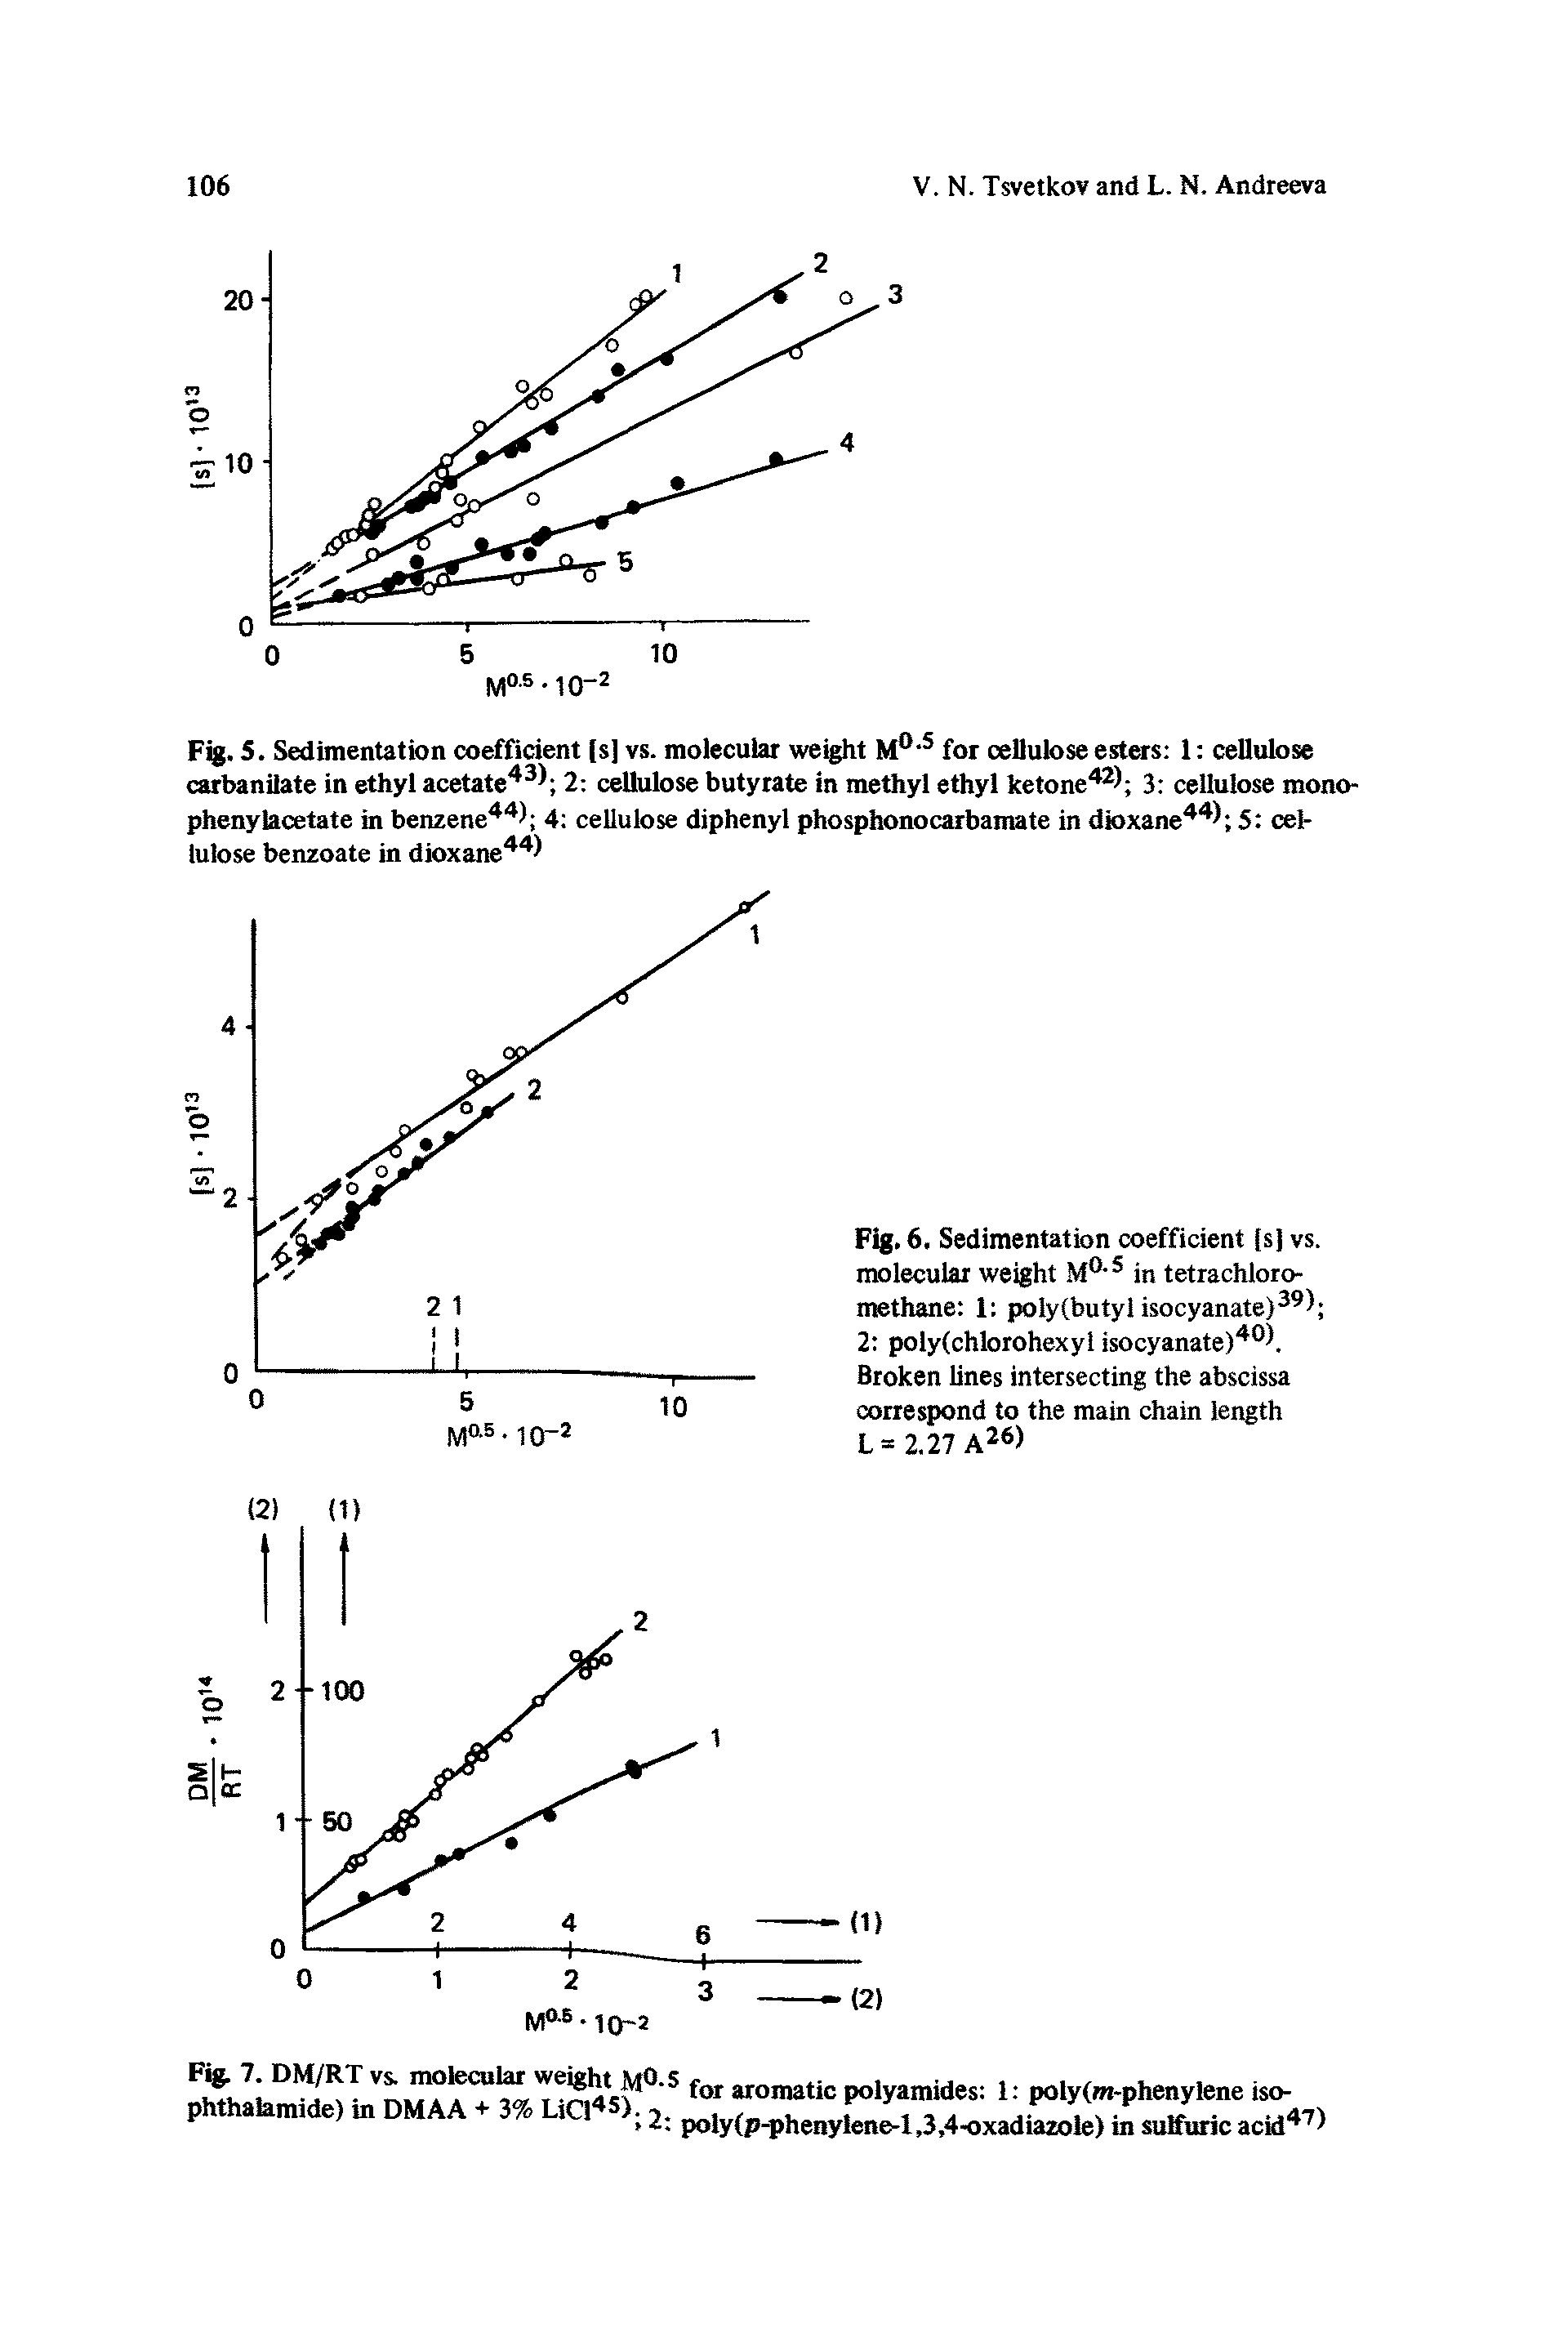 Fig. 5. Sedimentation coefficient (s] vs. molecular weight M for cellulose esters 1 cellulose carbanilate in ethyl acetate 2 cellulose butyrate in methyl ethyl ketone ) 3 cellulose mono-phenylacetate in benzene 4 cellulose diphenyl phosphonocarbamate in dioxane ) 5 cellulose benzoate in dioxane ...